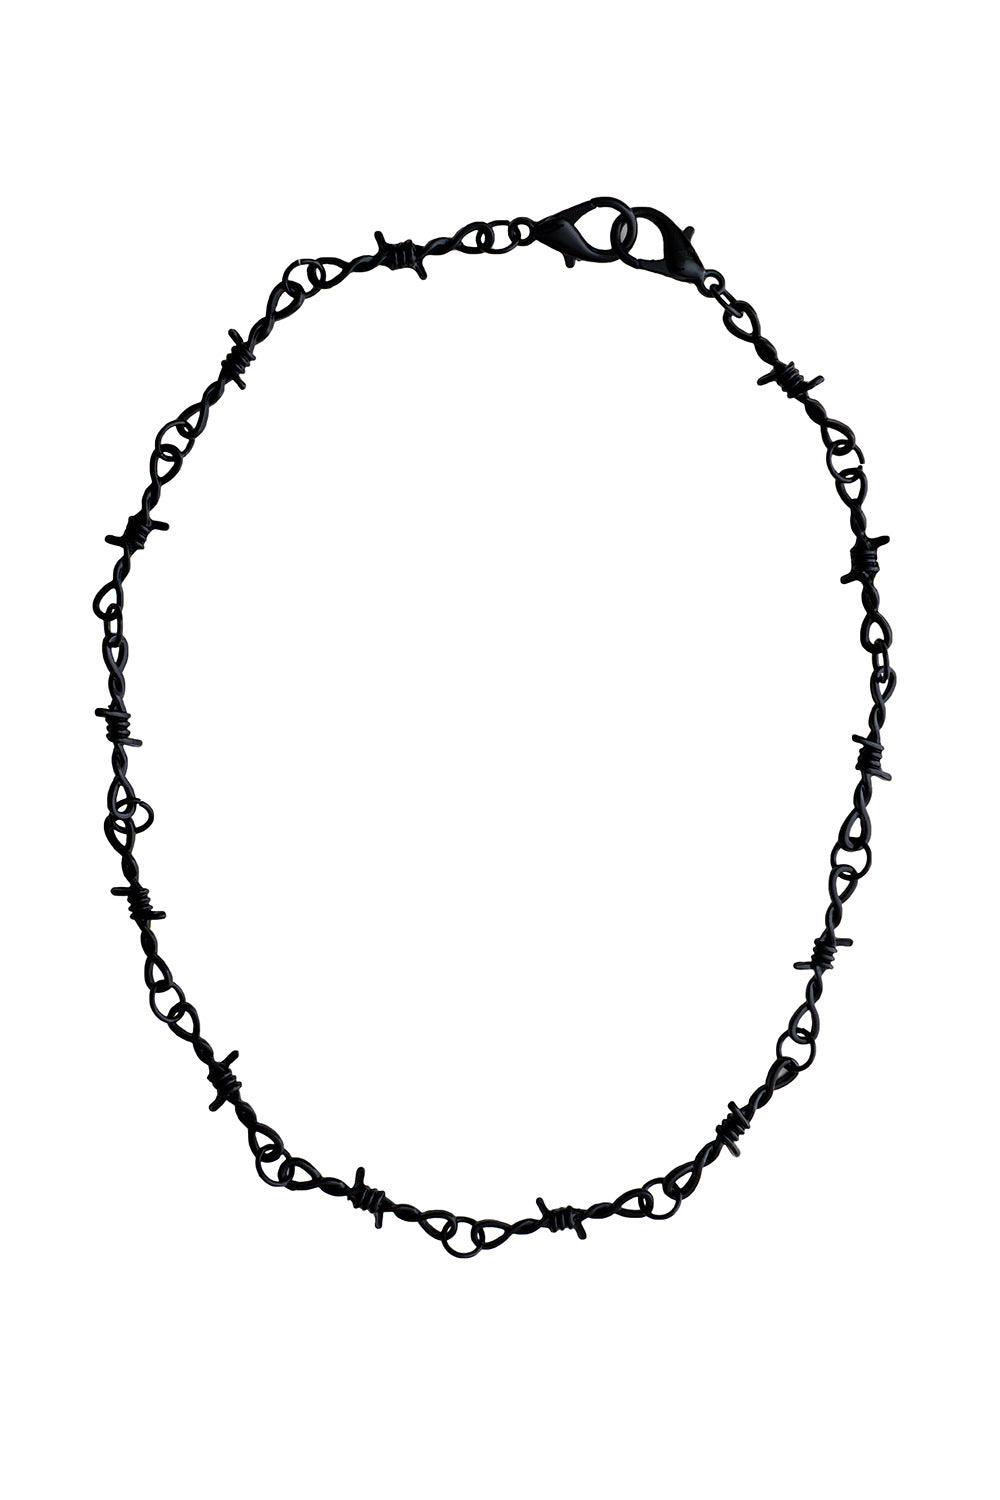 20” long  linked (not sharp!) necklace made of 1 1/4” pieces of barbed wire in shiny black enamel. 